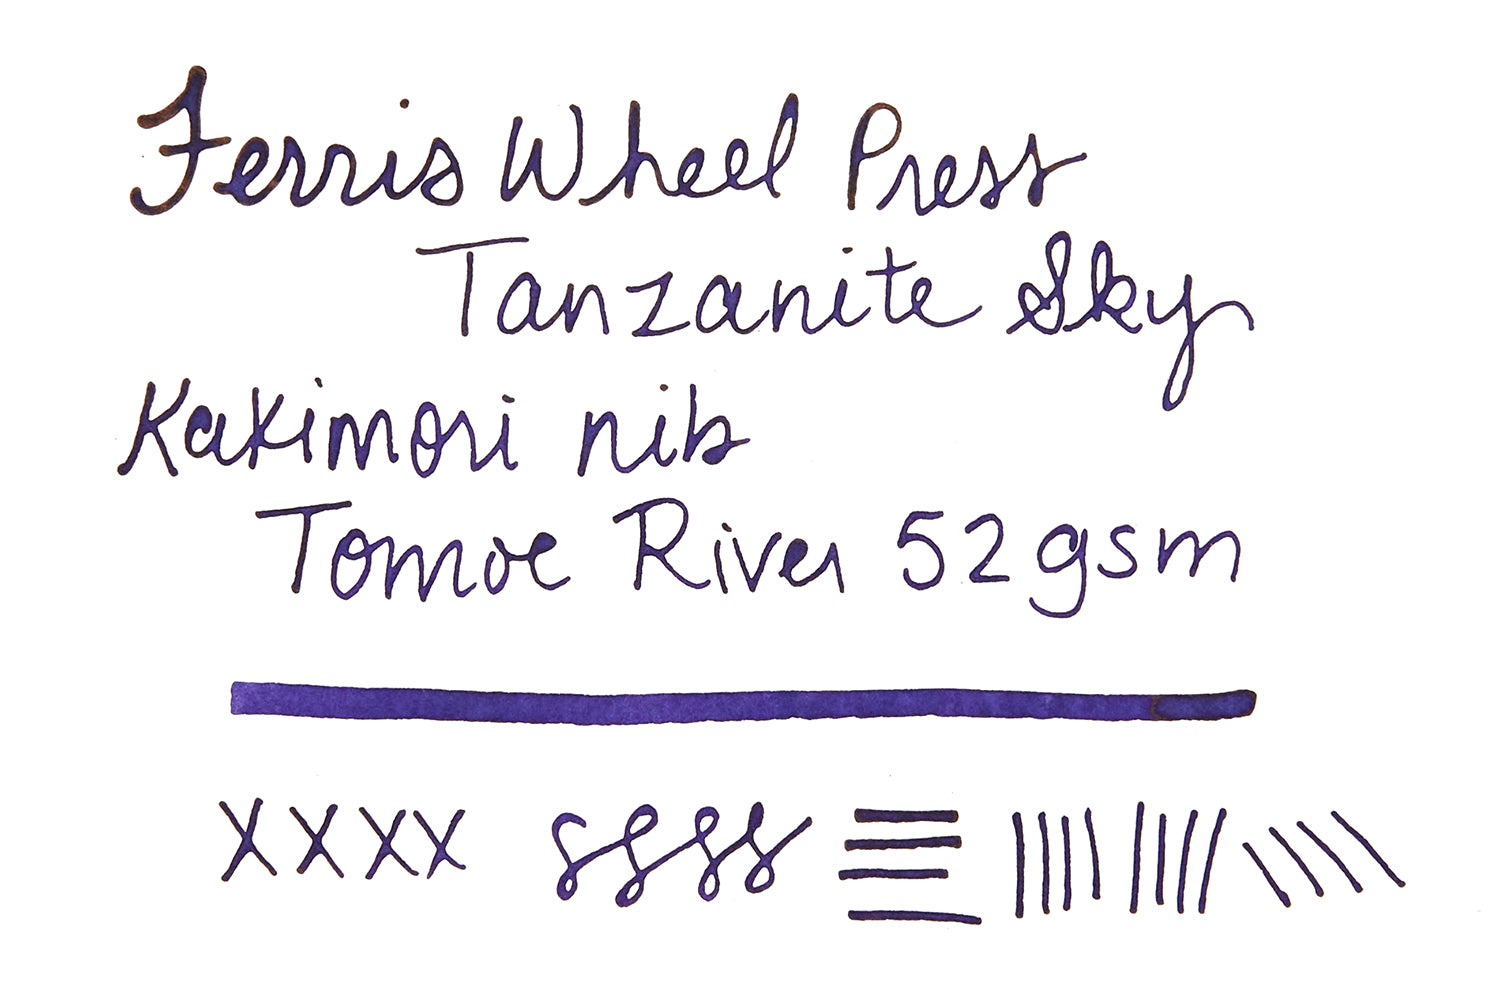 FWP Tanzanite Sky ink writing sample on white colored blank paper